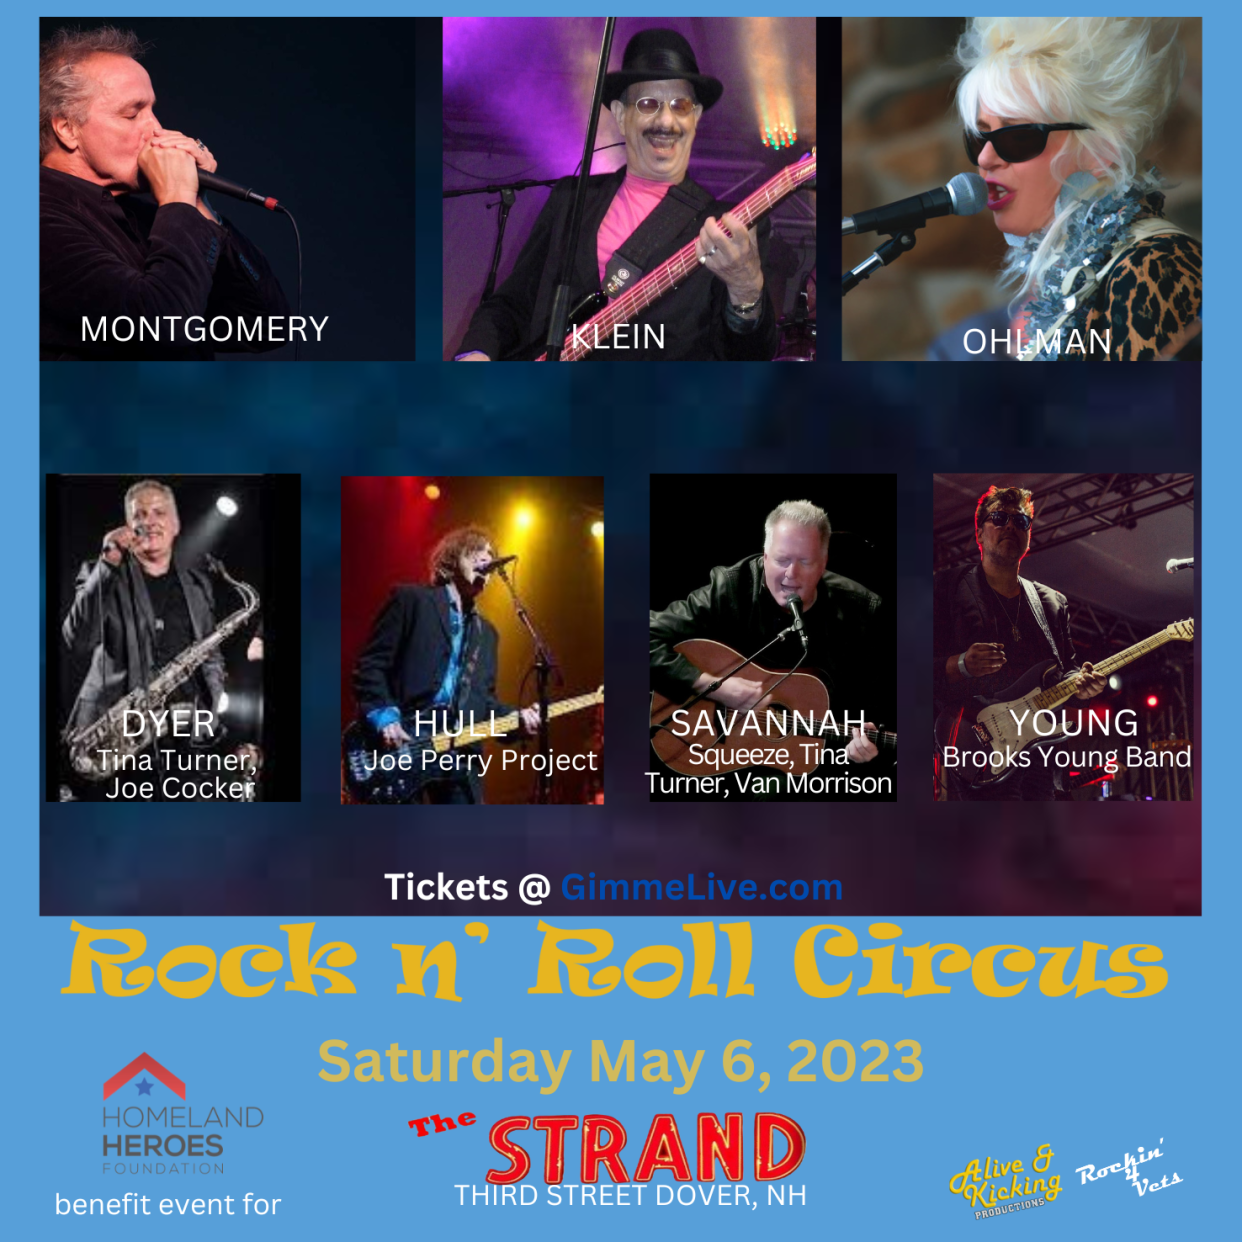 Rockin 4 Vets presents a classic rock event Rock n’ Roll Circus as a benefit for the Homeland Heroes Foundation on Saturday, May 6 at 8 p.m. at the Strand Theatre on Third Street in Dover.